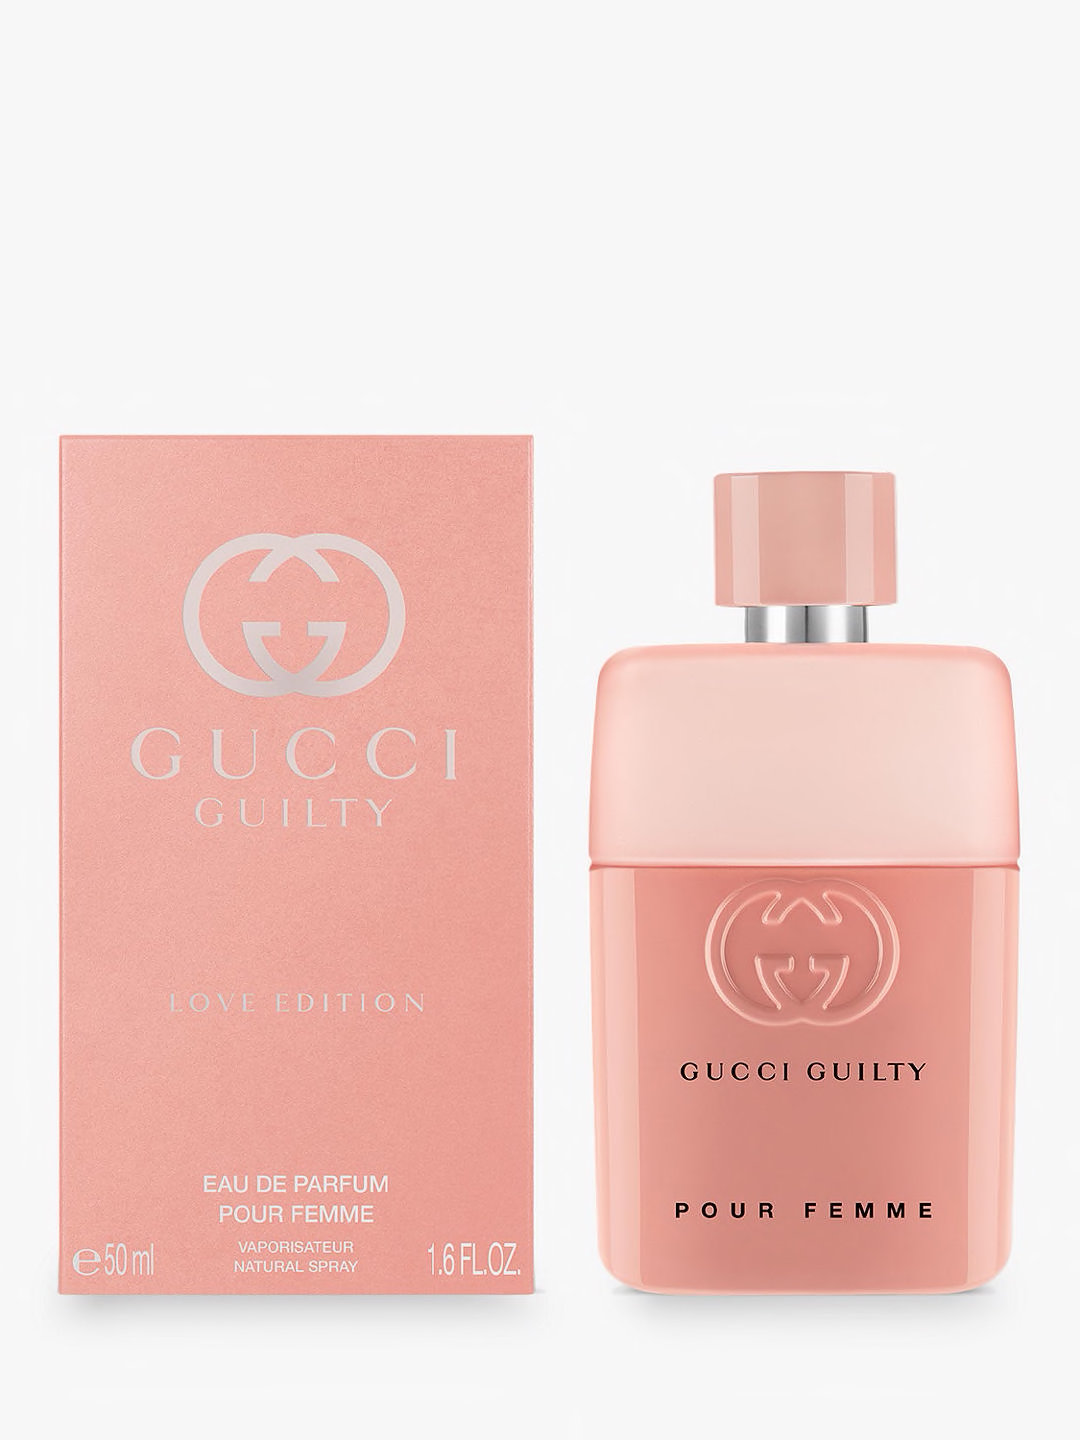 gucci guilty black 50ml boots